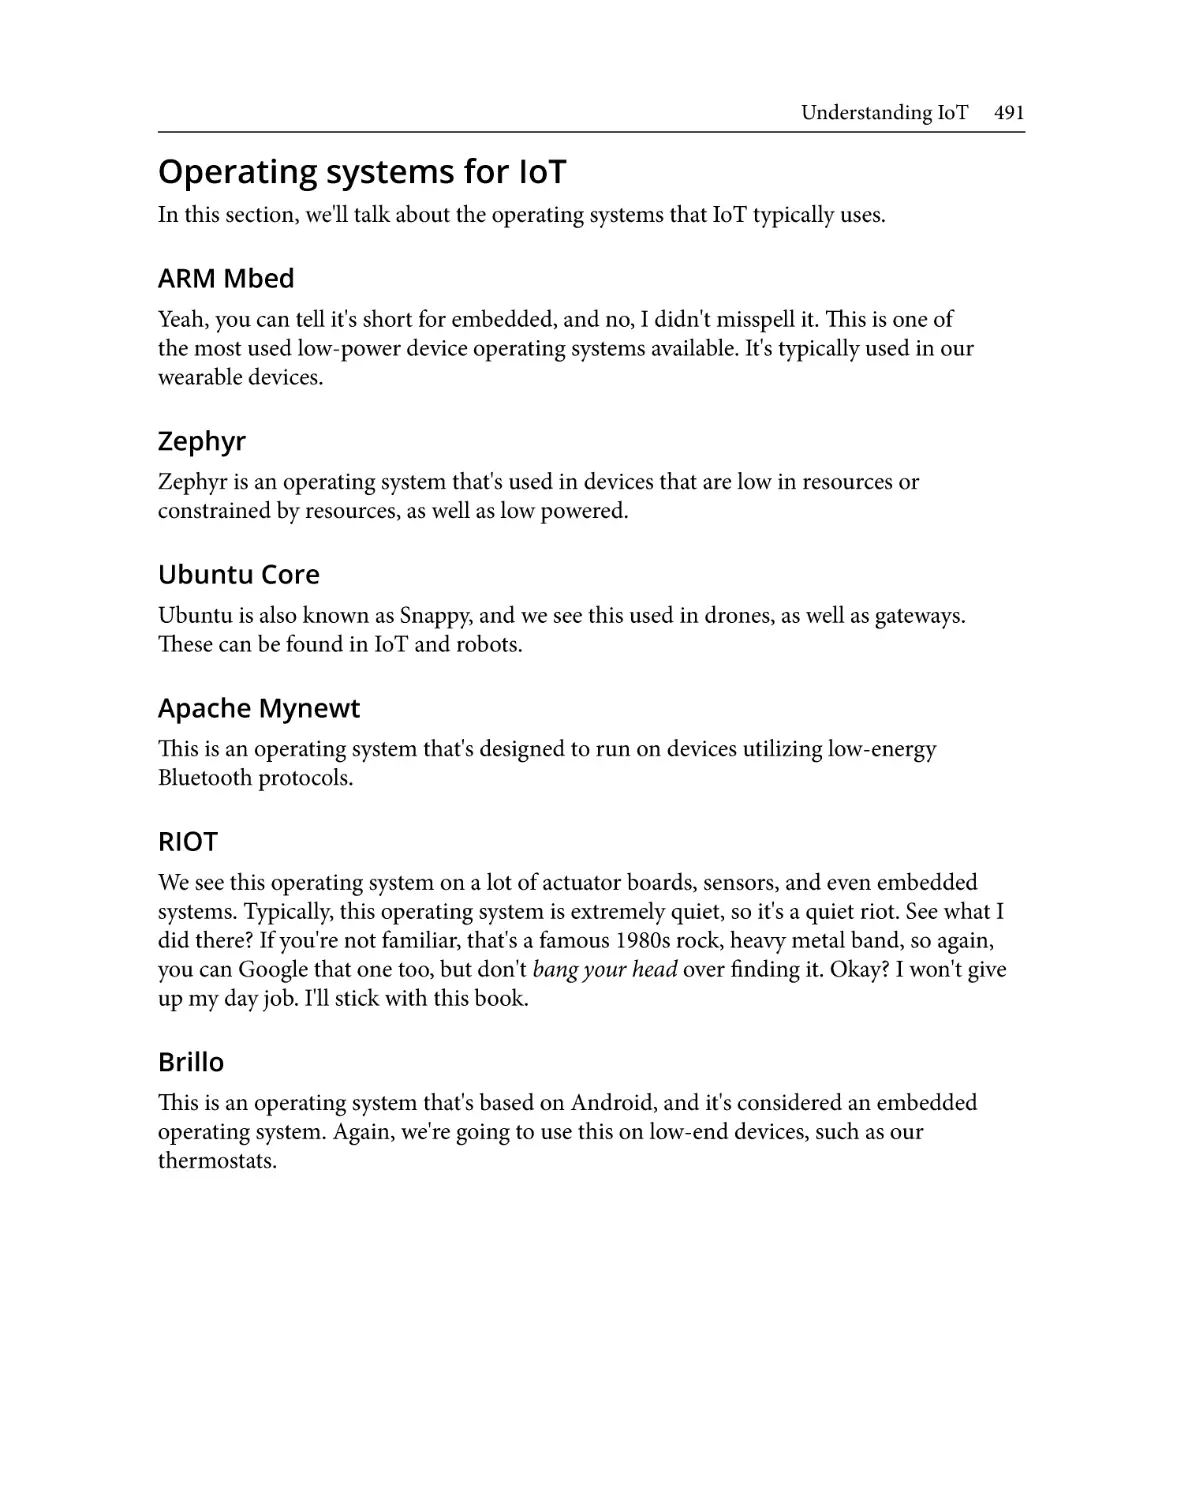 Operating systems for IoT